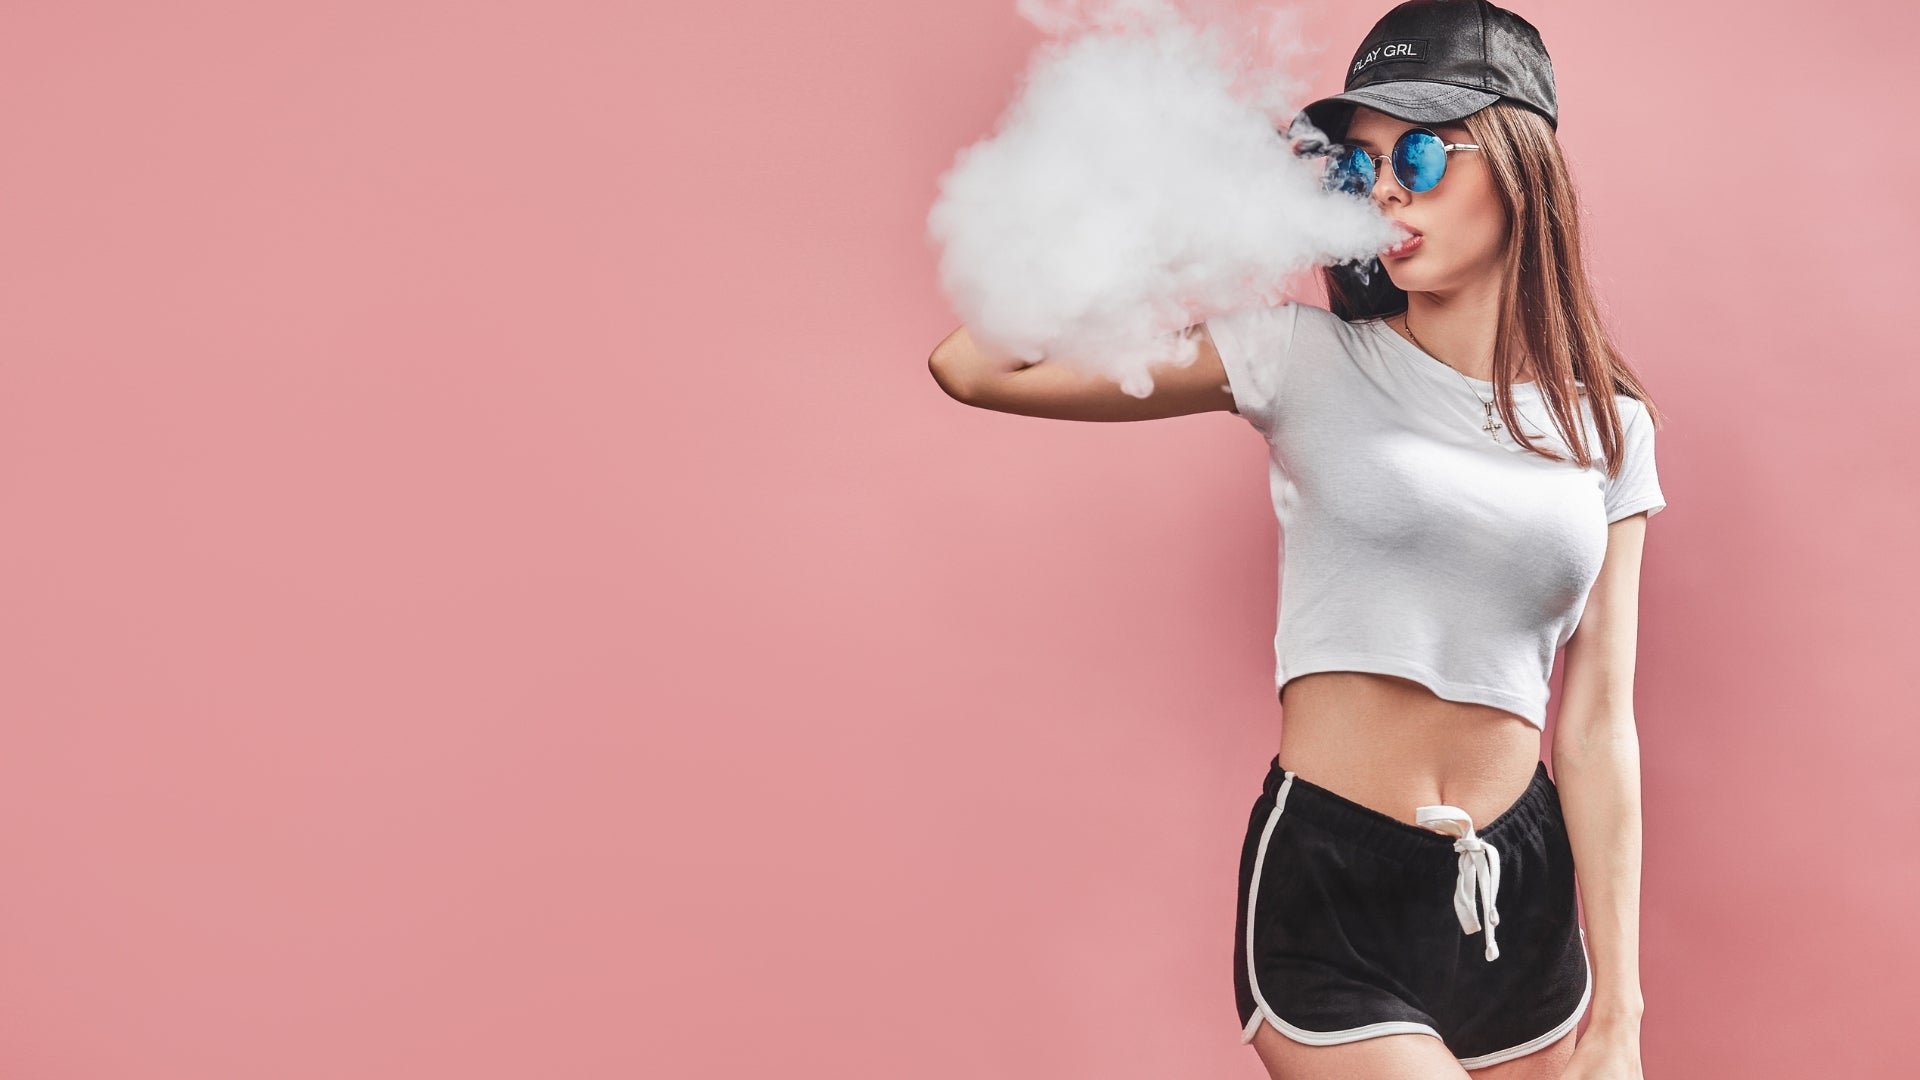 What is a Refillable Disposable Vape?